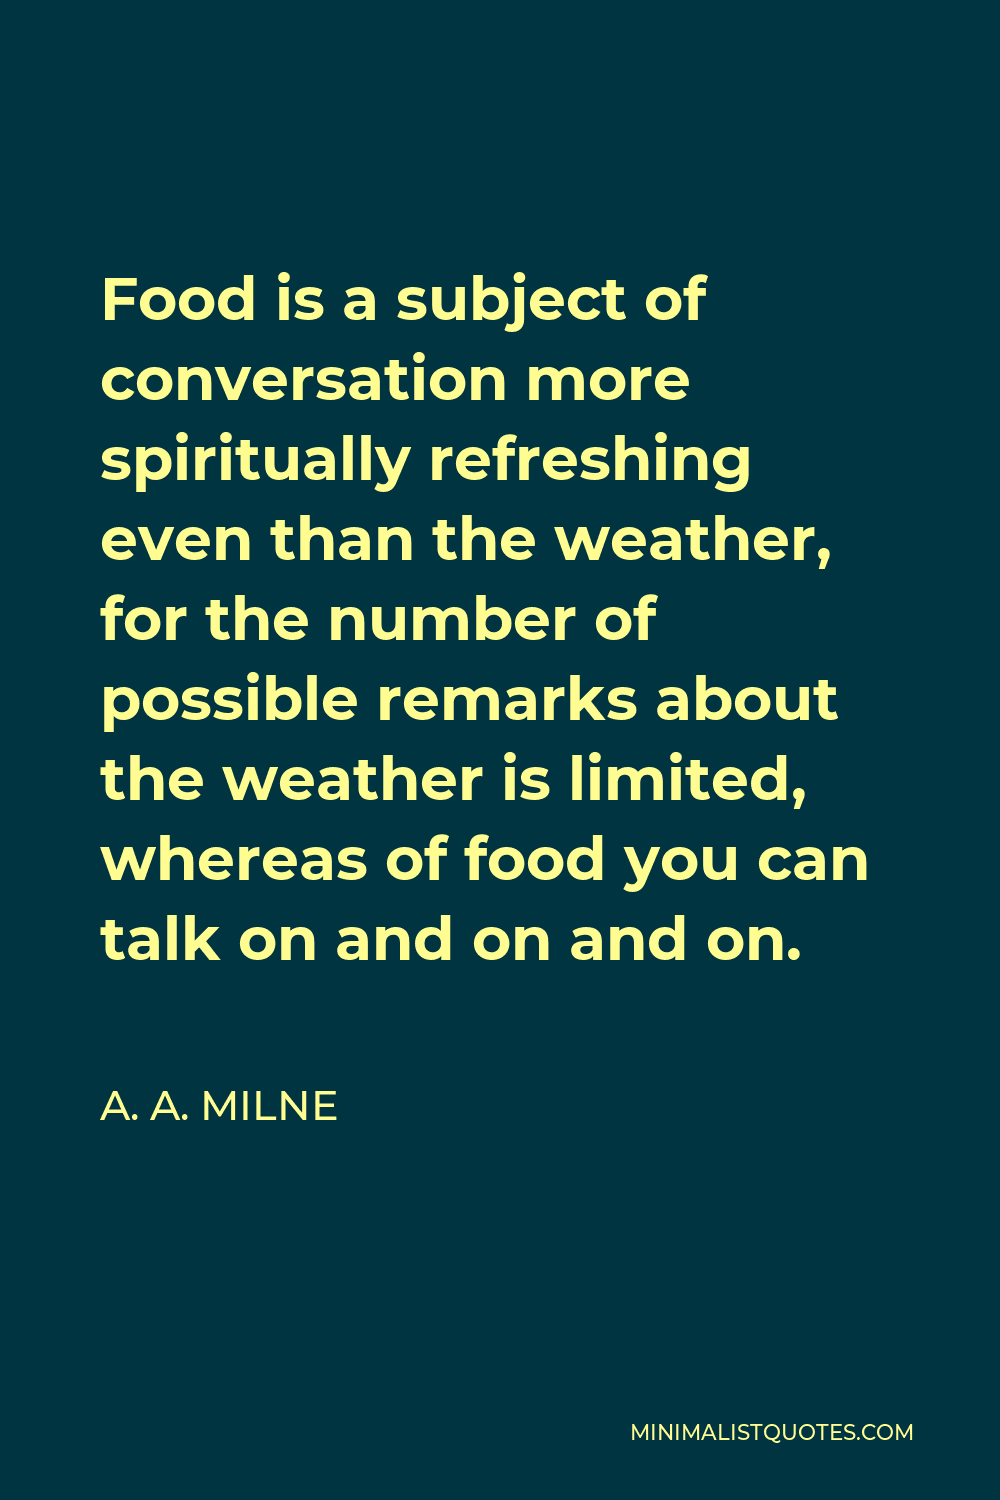 A. A. Milne Quote - Food is a subject of conversation more spiritually refreshing even than the weather, for the number of possible remarks about the weather is limited, whereas of food you can talk on and on and on.